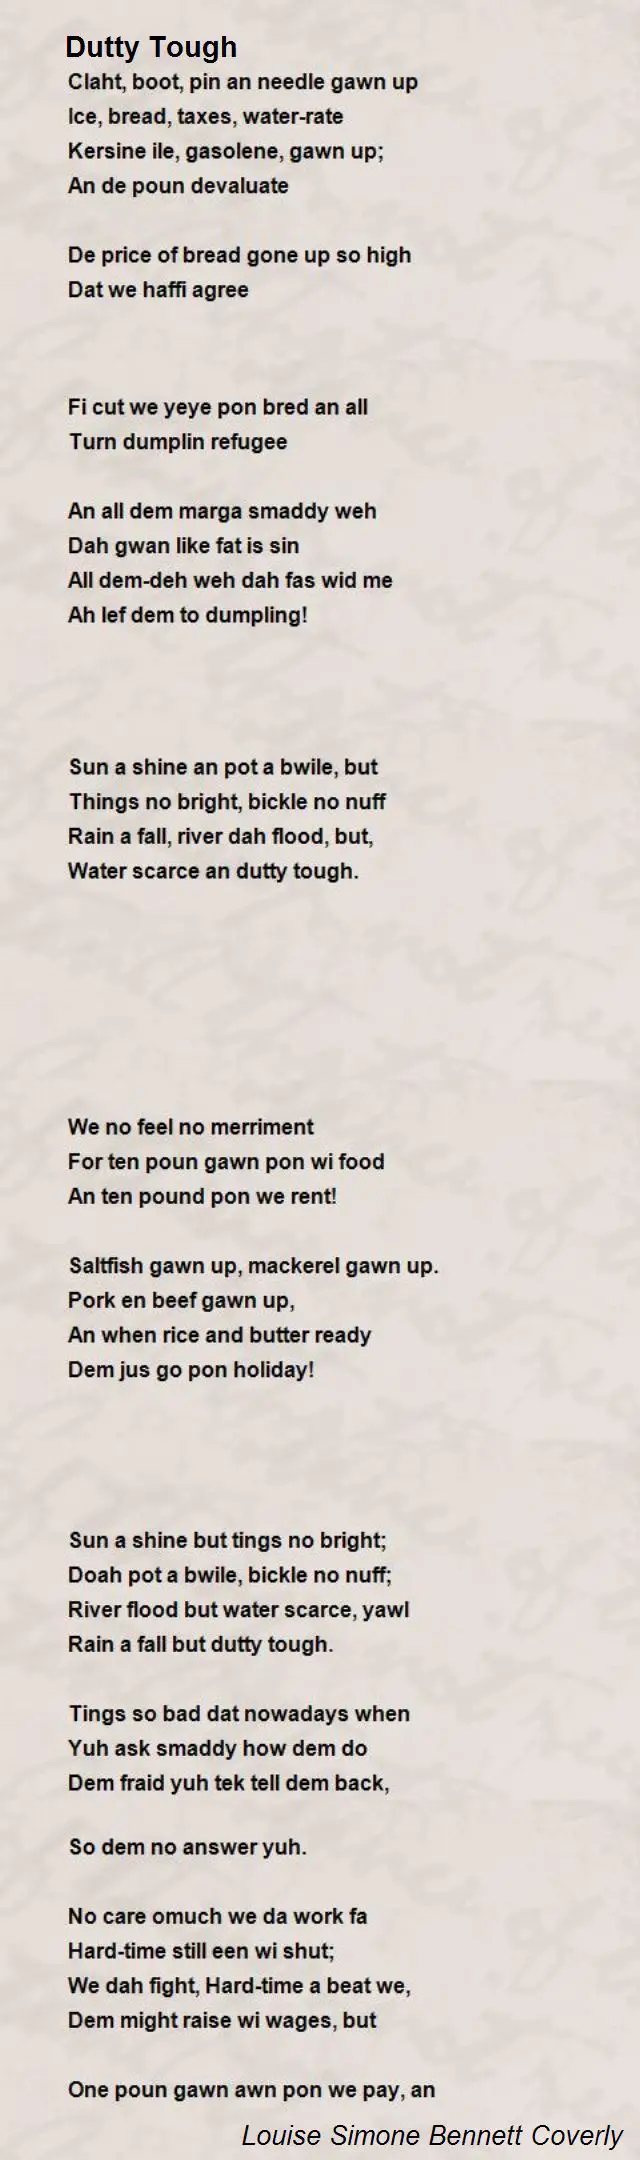 Dutty Tough - Dutty Tough Poem by Louise Simone Bennett Coverly